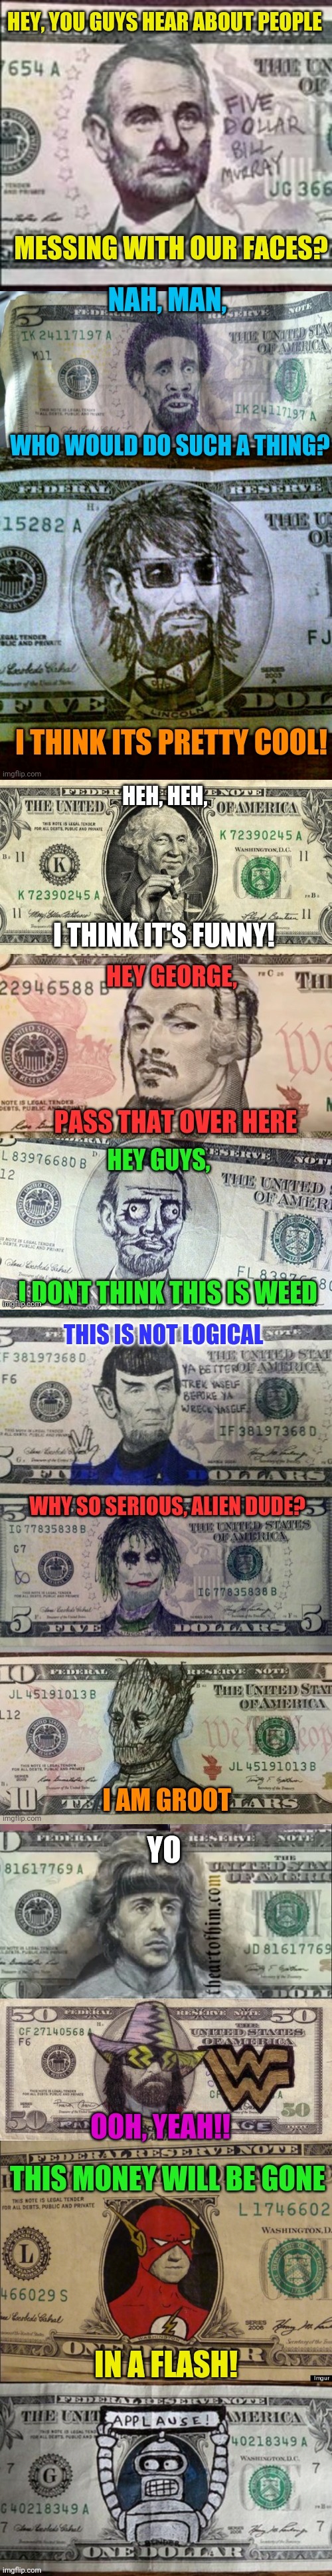 Funny Money | image tagged in dollars,money,funny,drawings,founding fathers,celebrities | made w/ Imgflip meme maker